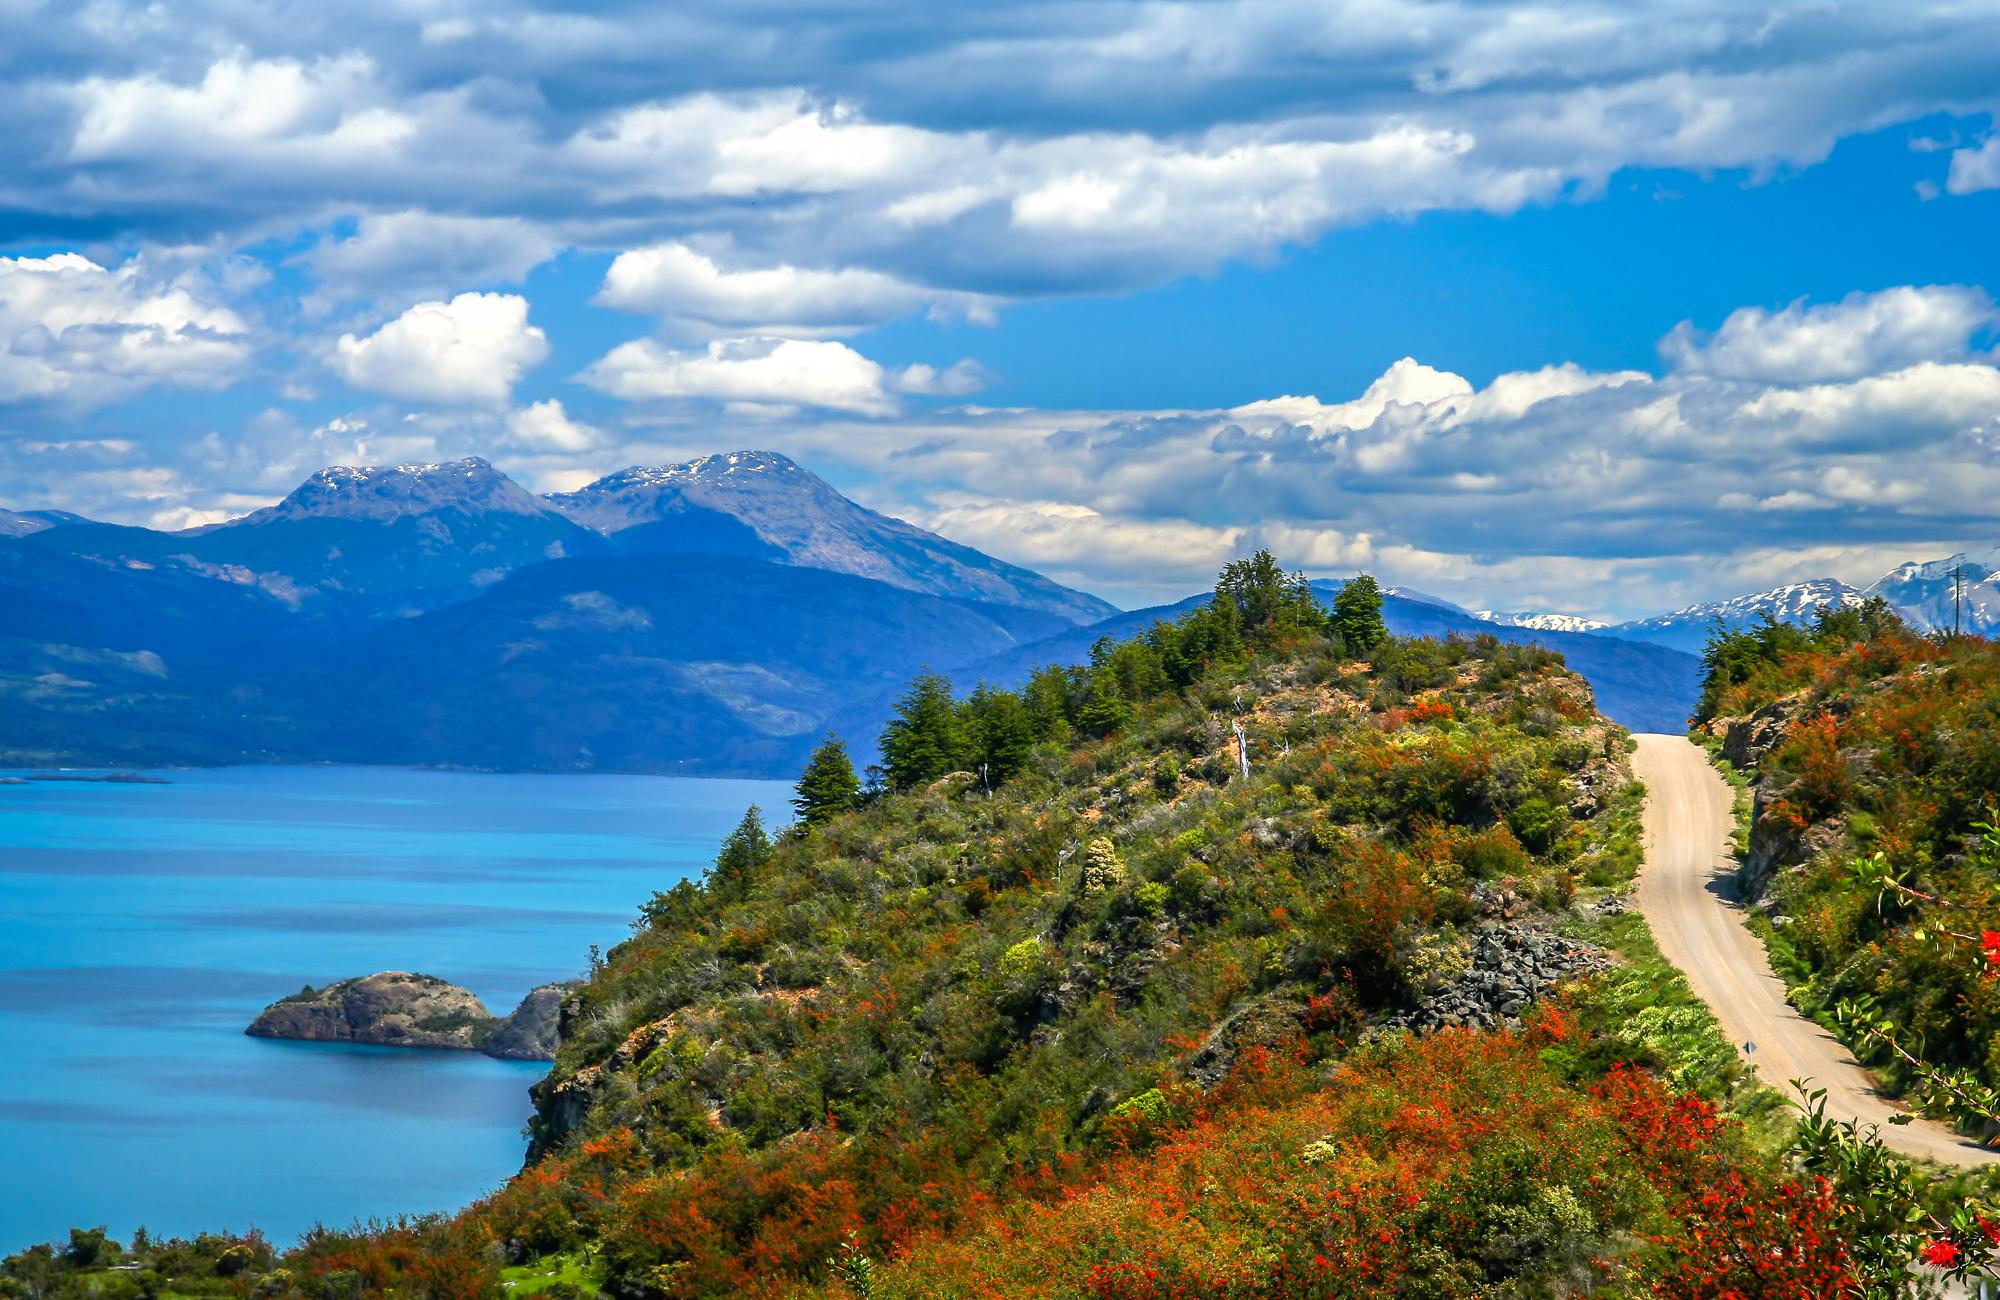 The Ultimate Patagonia Road Trip Itinerary